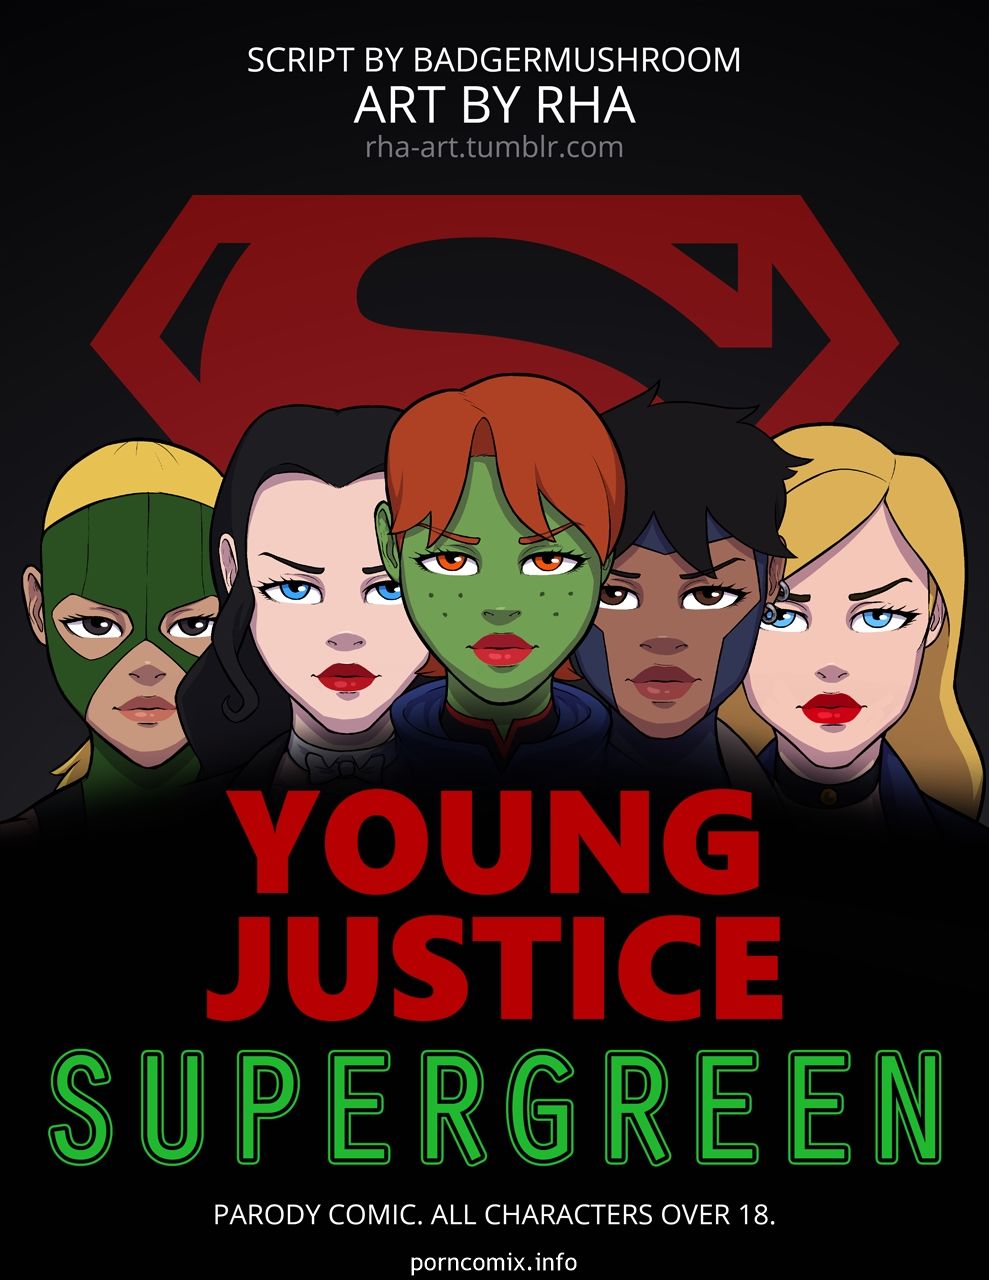 RHA - Young Justice Supergreen page 1